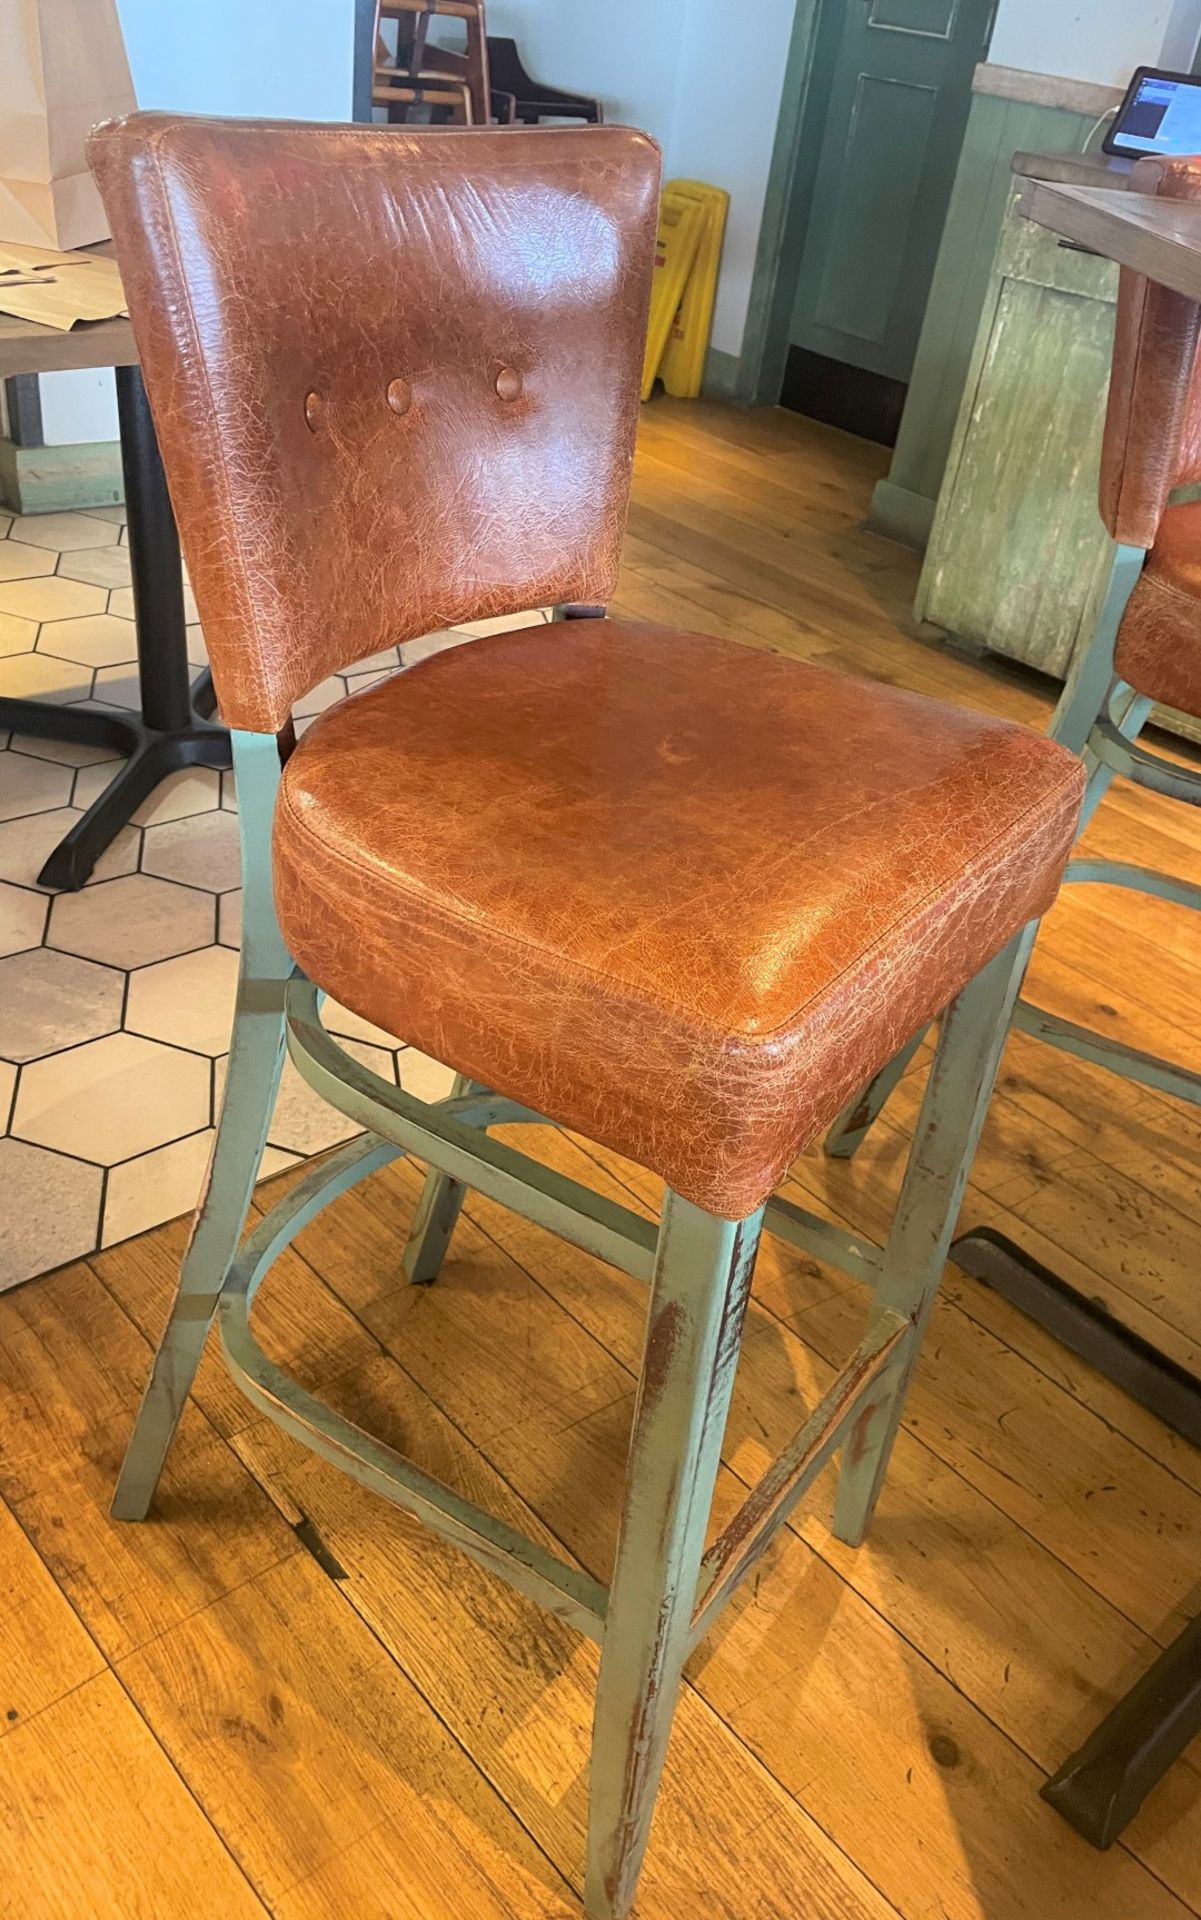 4 x Commercial Restaurant Bar Stools Featuring Wooden Frames With a Distressed Finish and Tan - Image 7 of 15